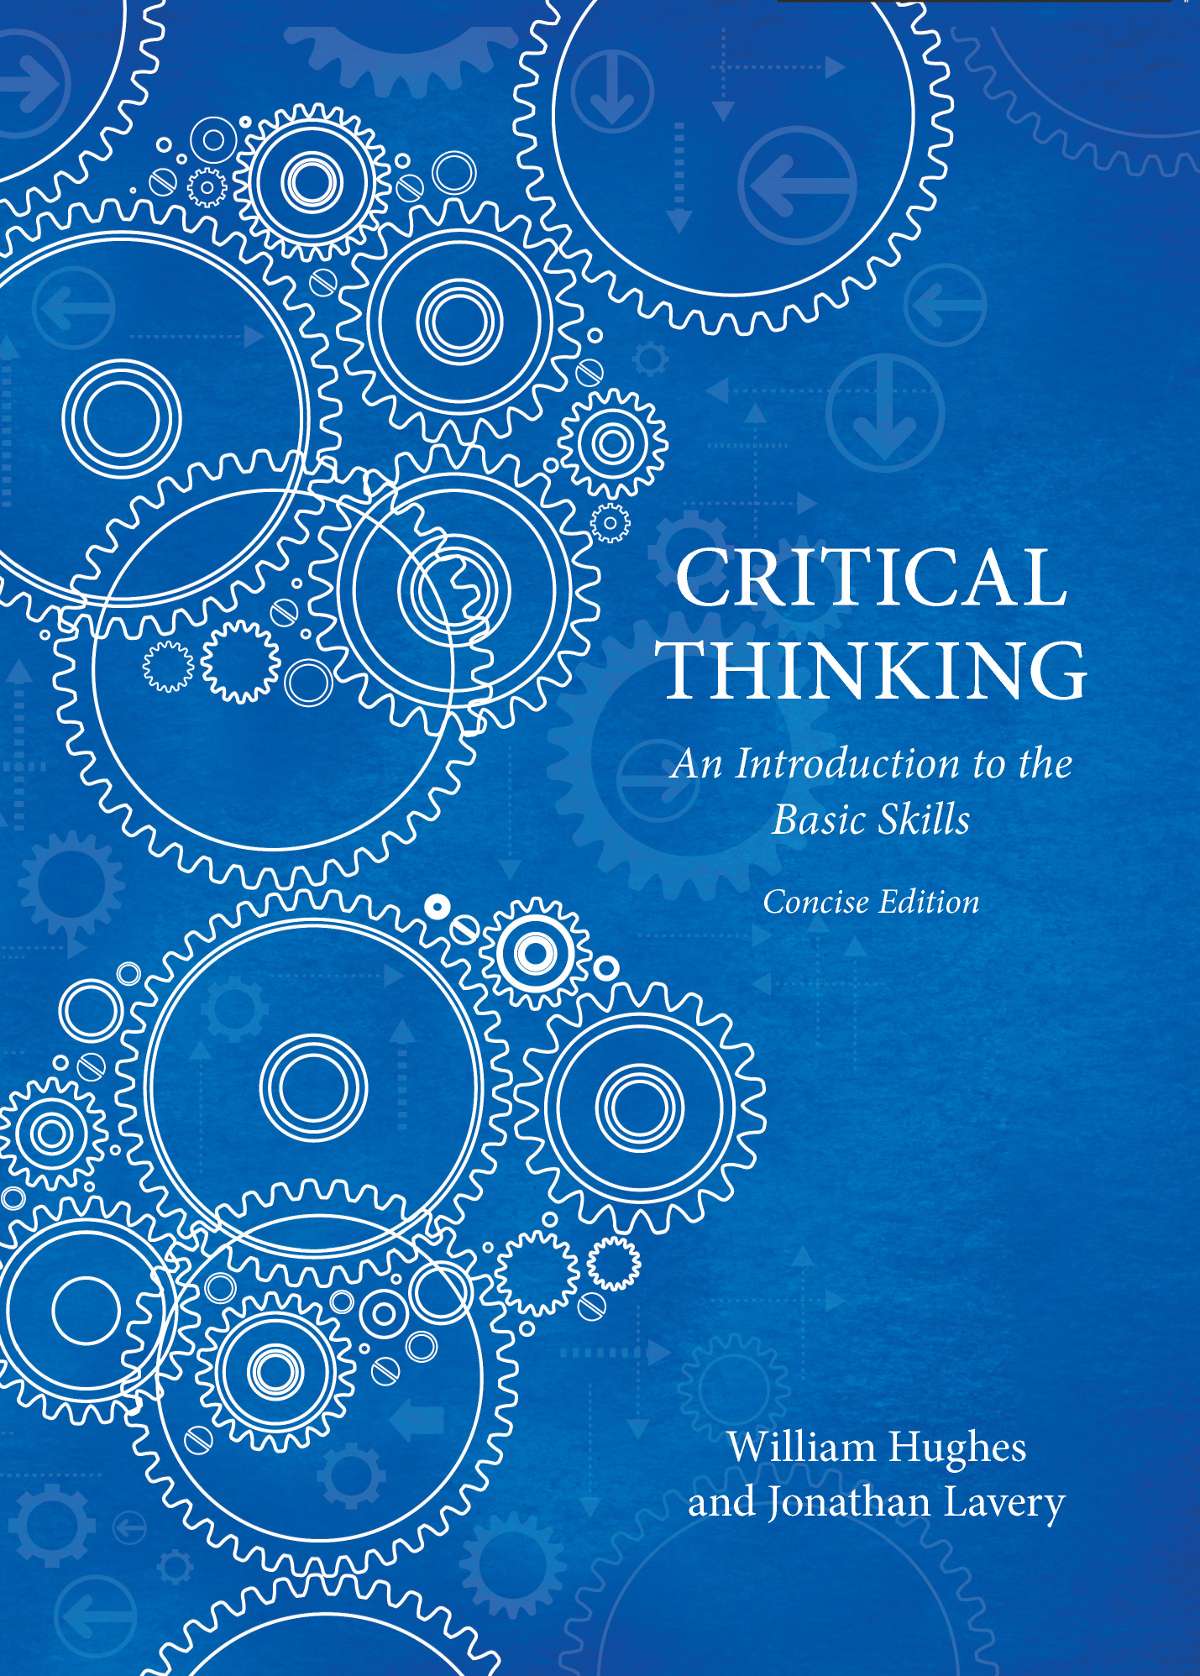 critical thinking a concise guide 5th edition pdf